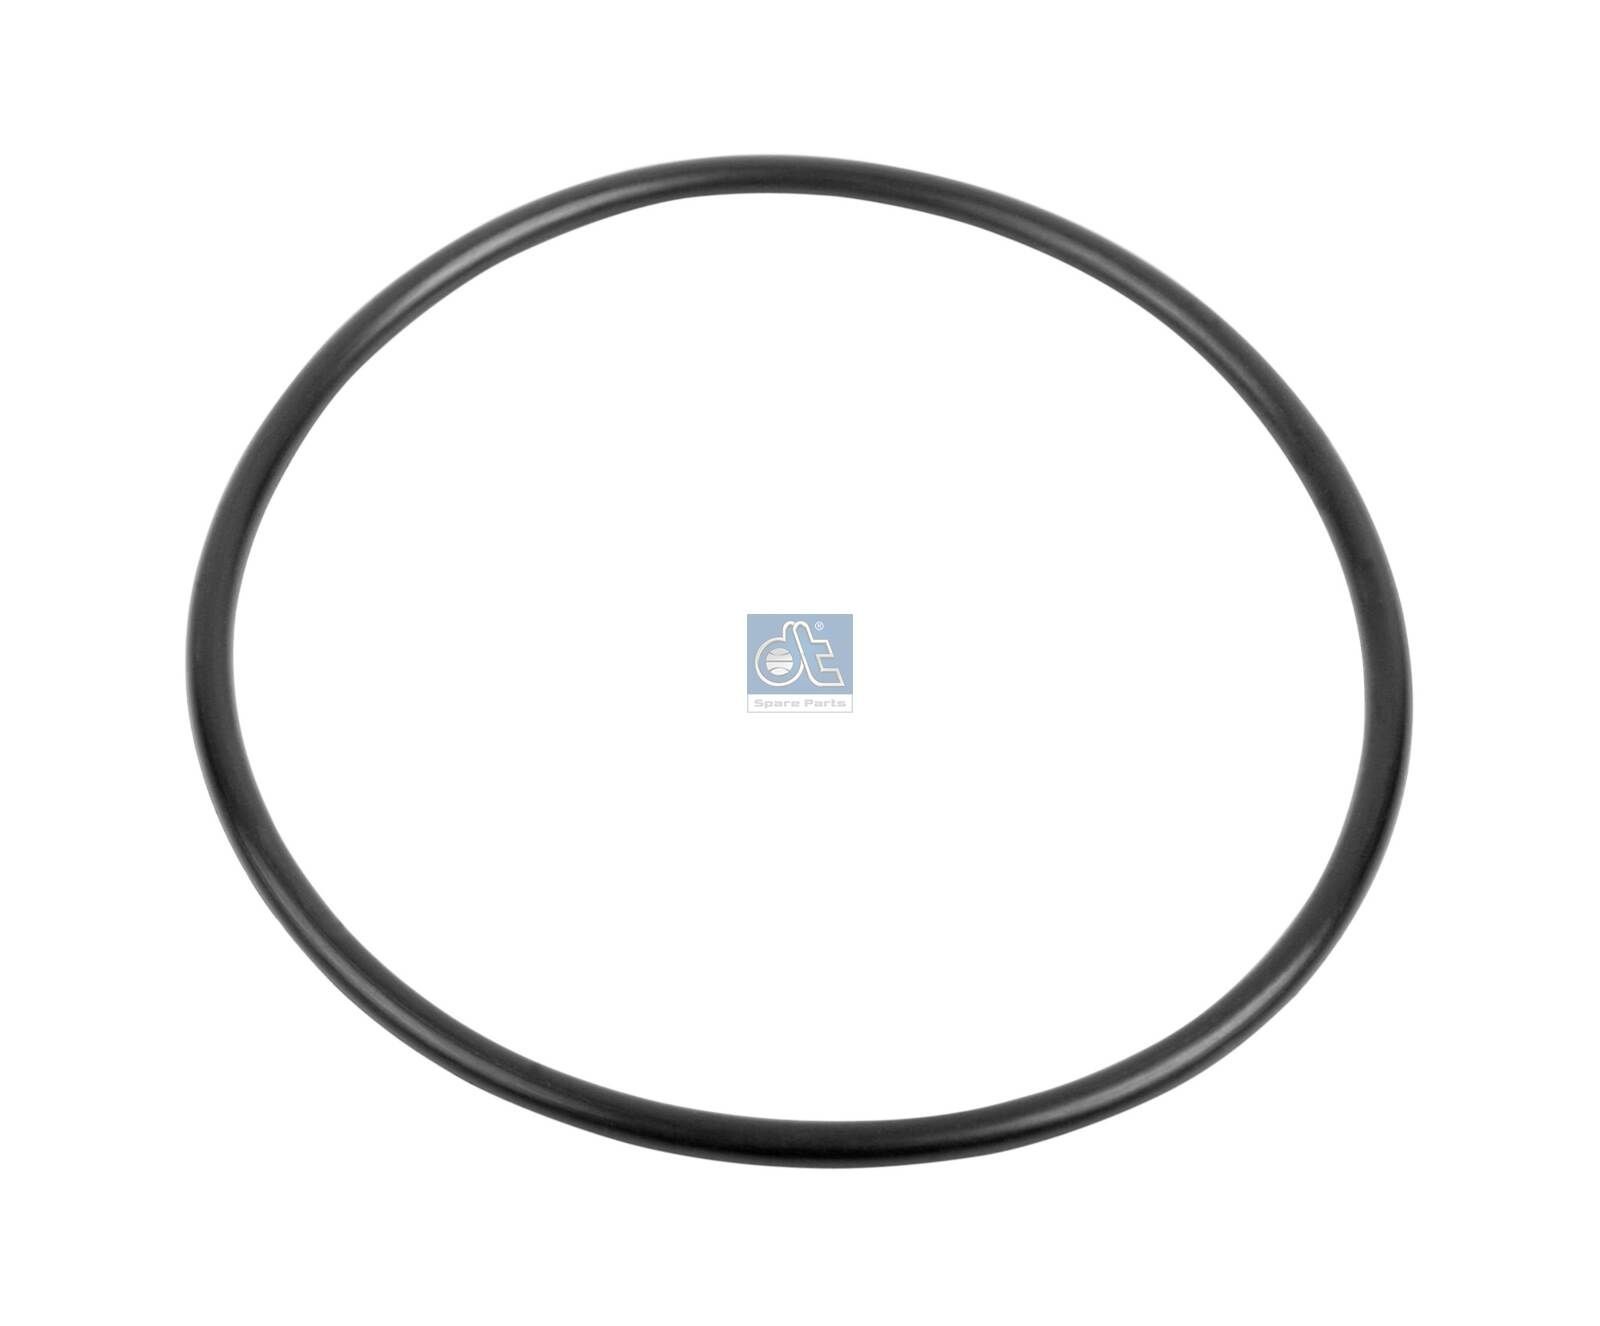 DT Spare Parts 92 x 4 mm, O-Ring, NBR (nitrile butadiene rubber) Seal Ring 10.30656 buy